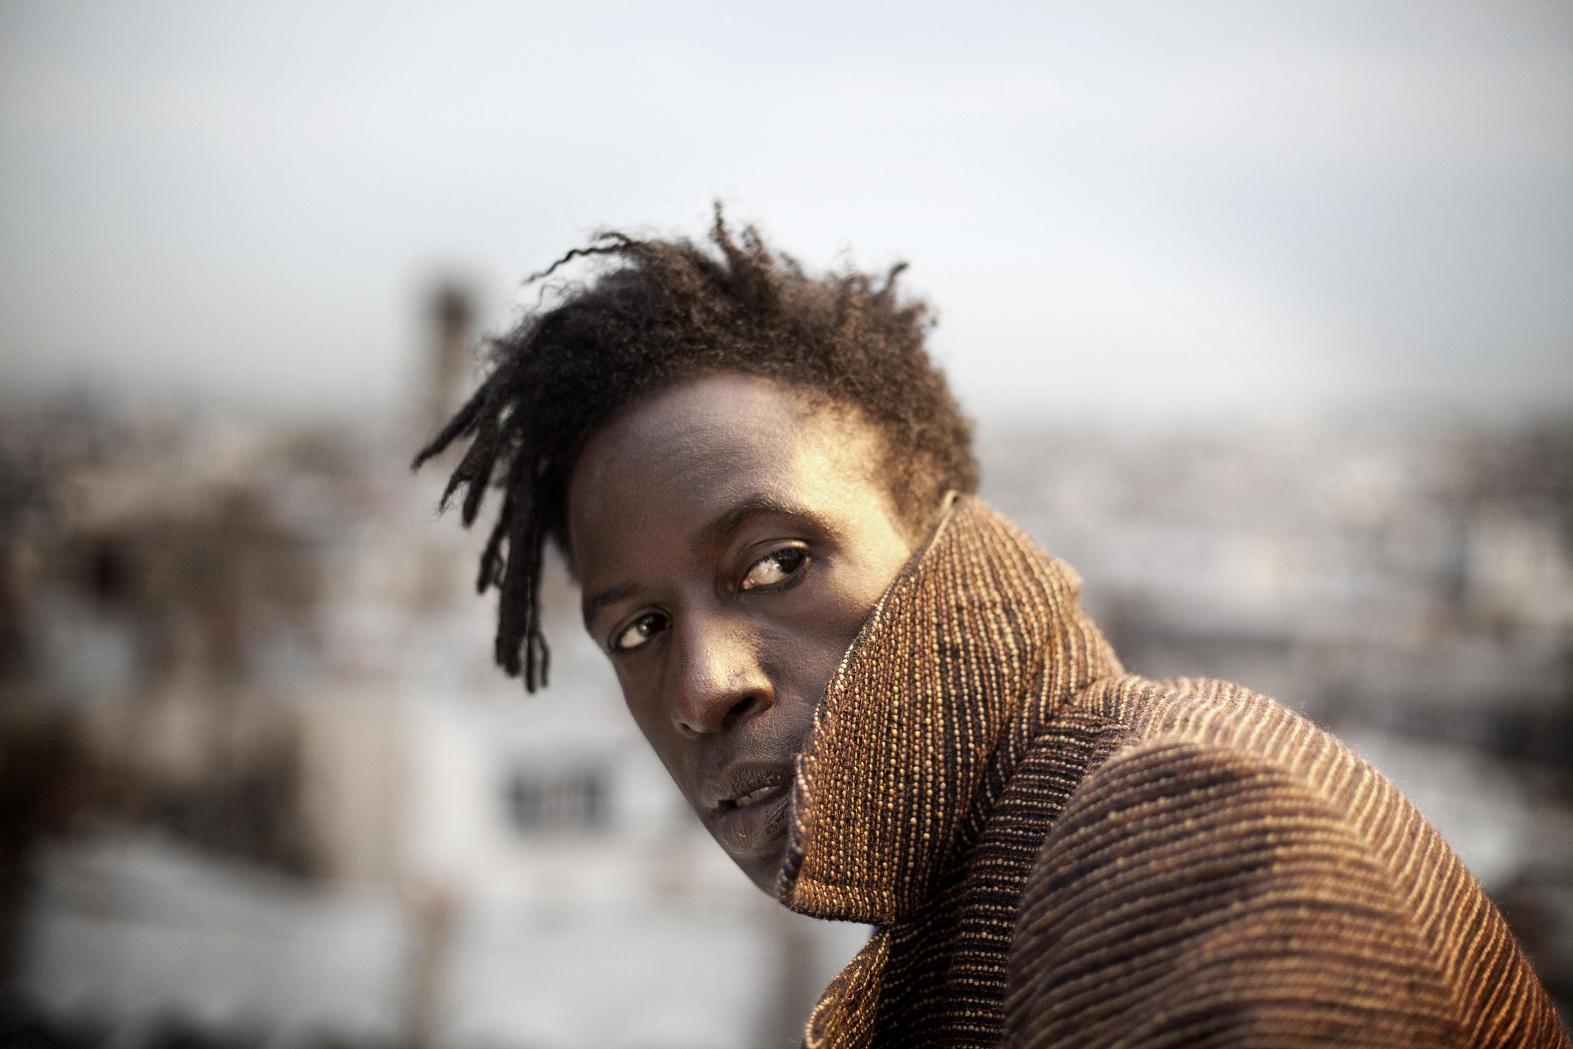 Read: Drowned In Sound interviews Saul Williams ahead of his LGW performance